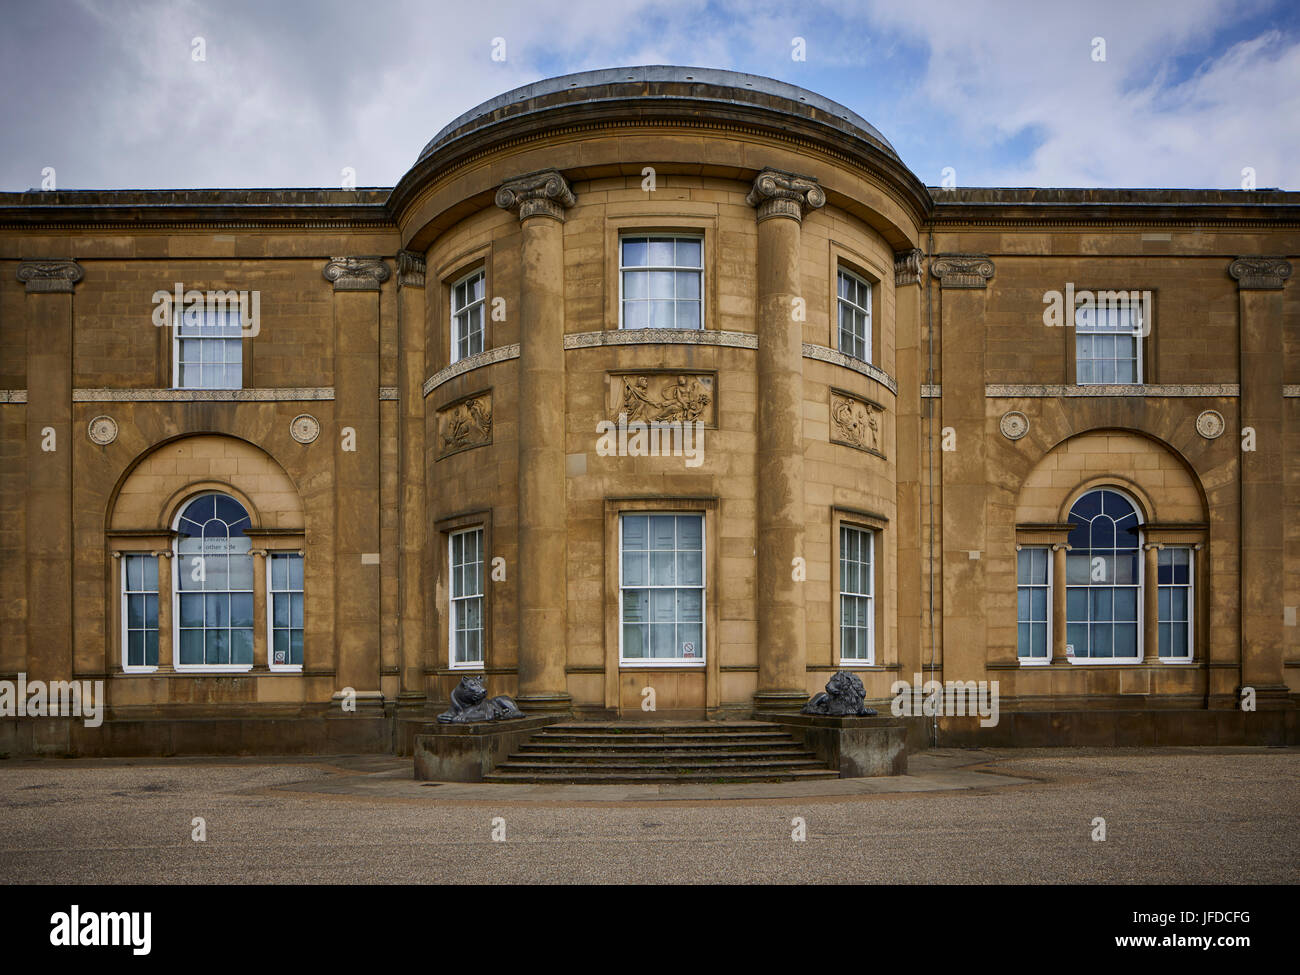 Manchester City Council's Grade I listed, neoclassical 18th century country house sandstone Heaton Hall, Heaton Park within a municipal park north of  Stock Photo